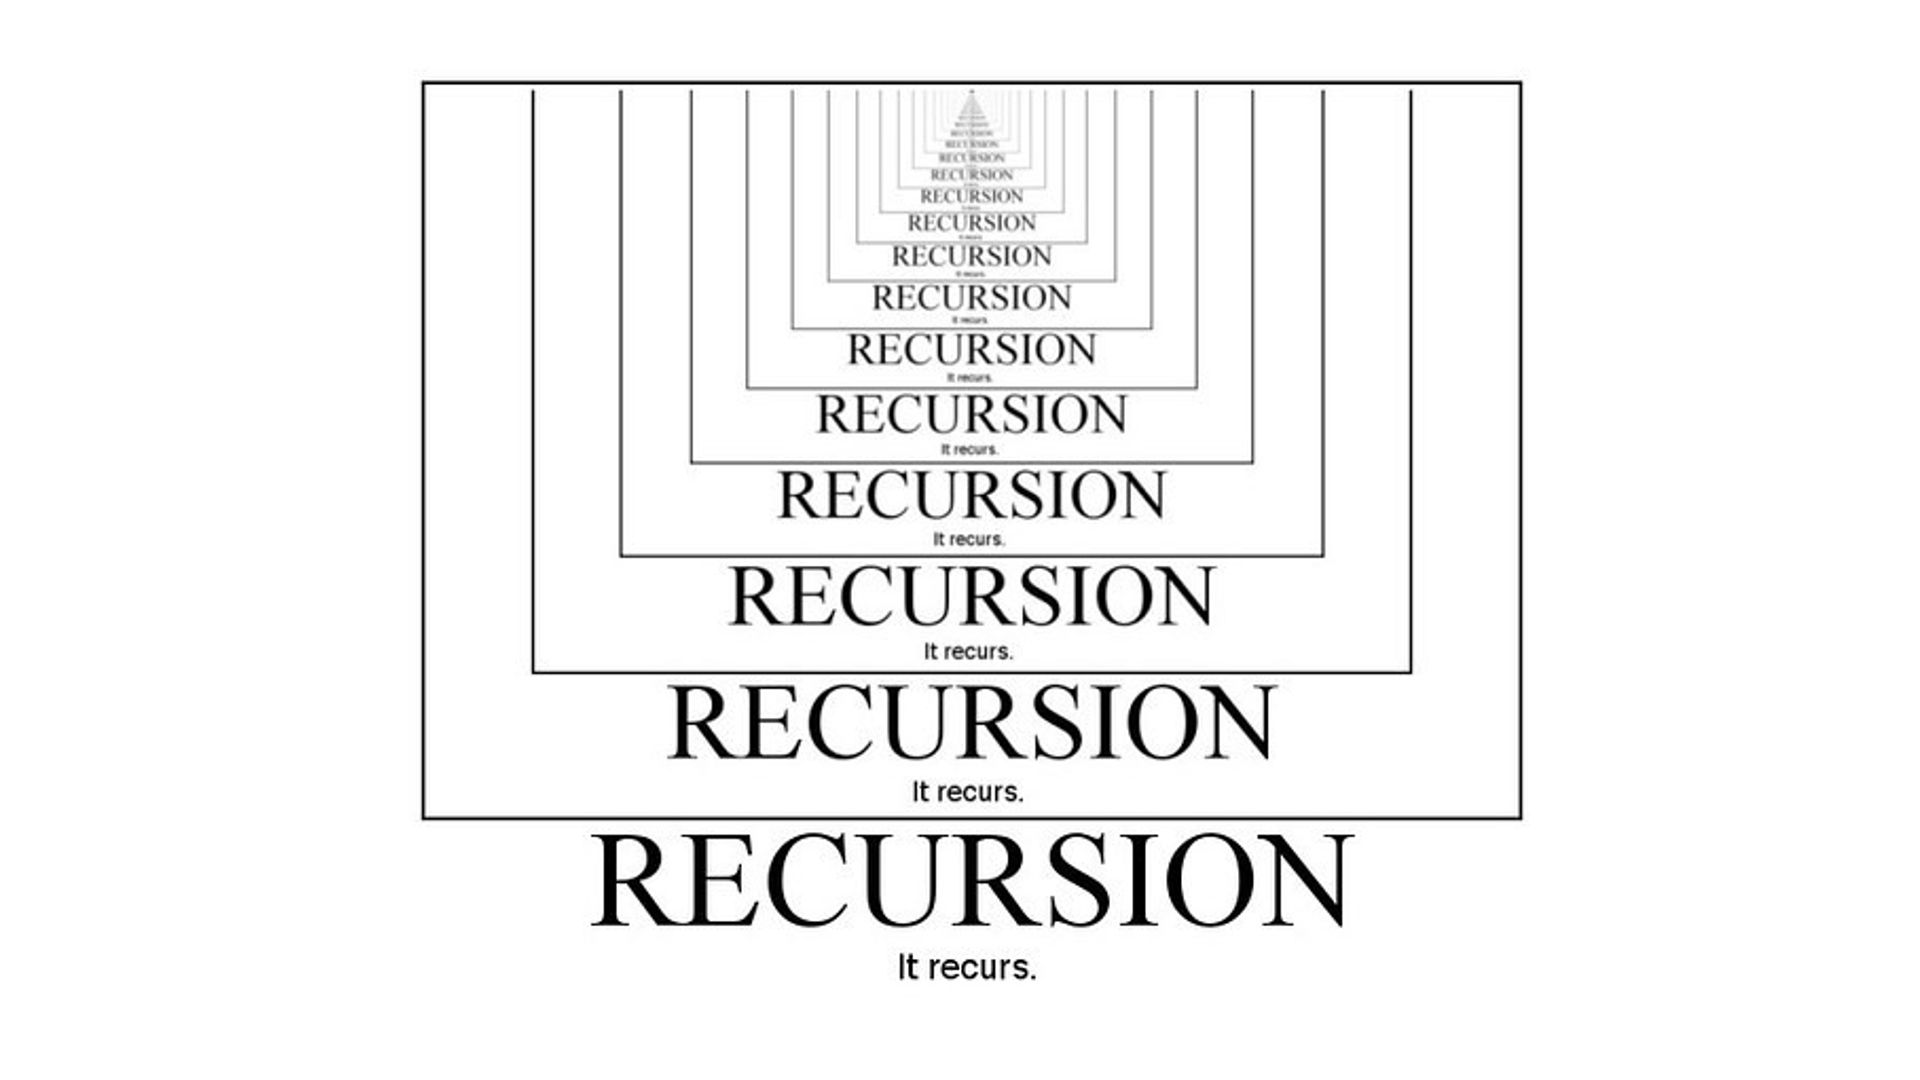 A Simple Introduction to Recursion